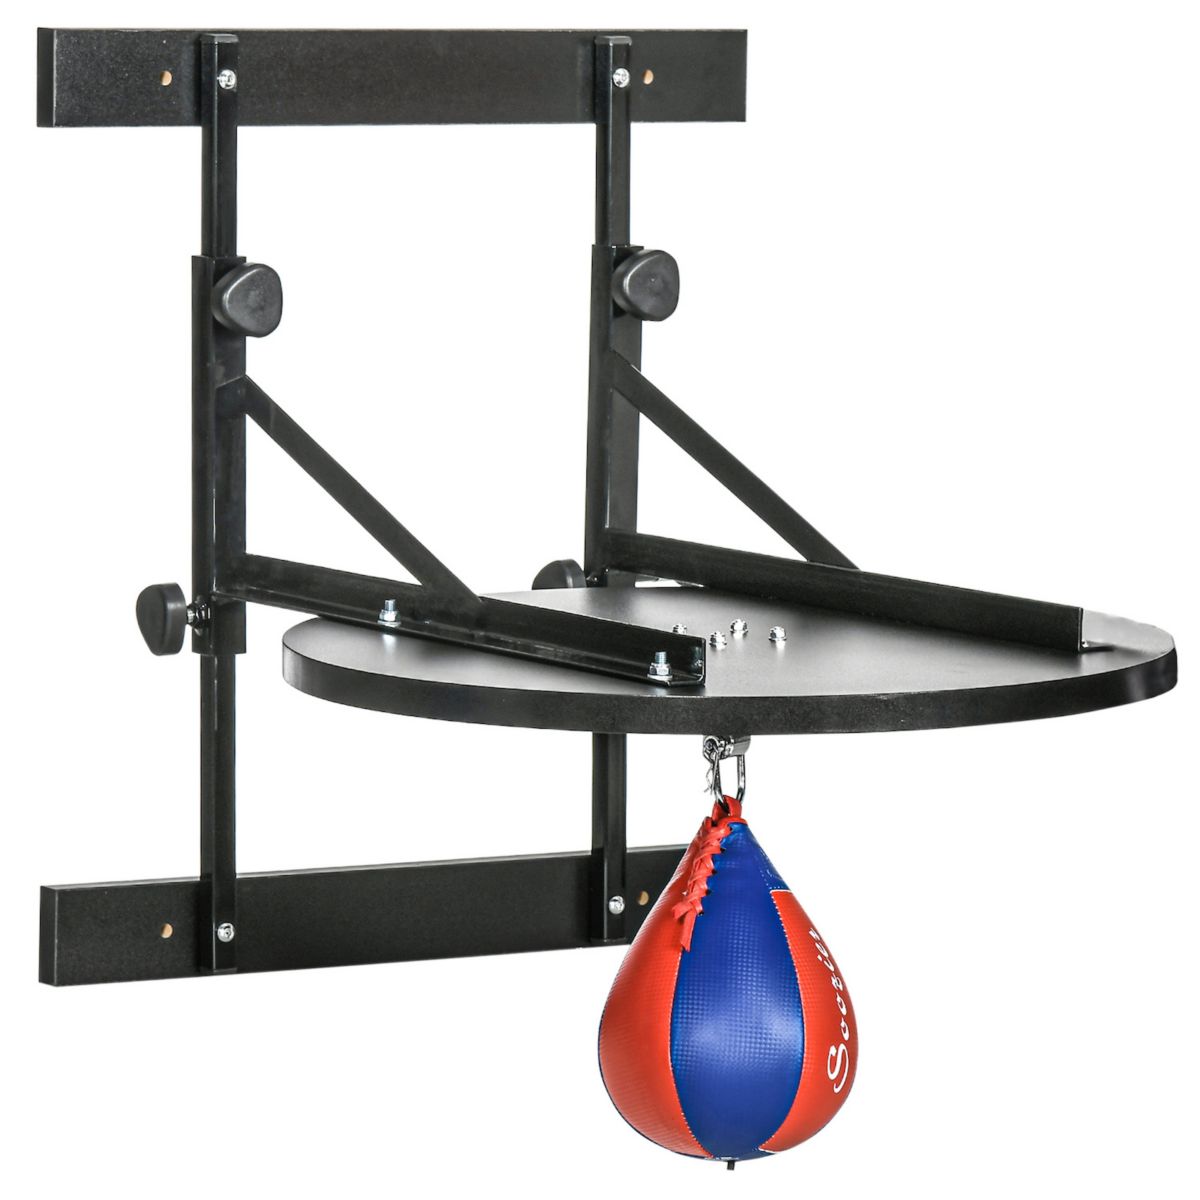 Soozier Adjustable Speed Bag Platform, Wall Mounted Speed Bags for Boxing, with 360-Degree Swive and 10'' Speedbag Soozier